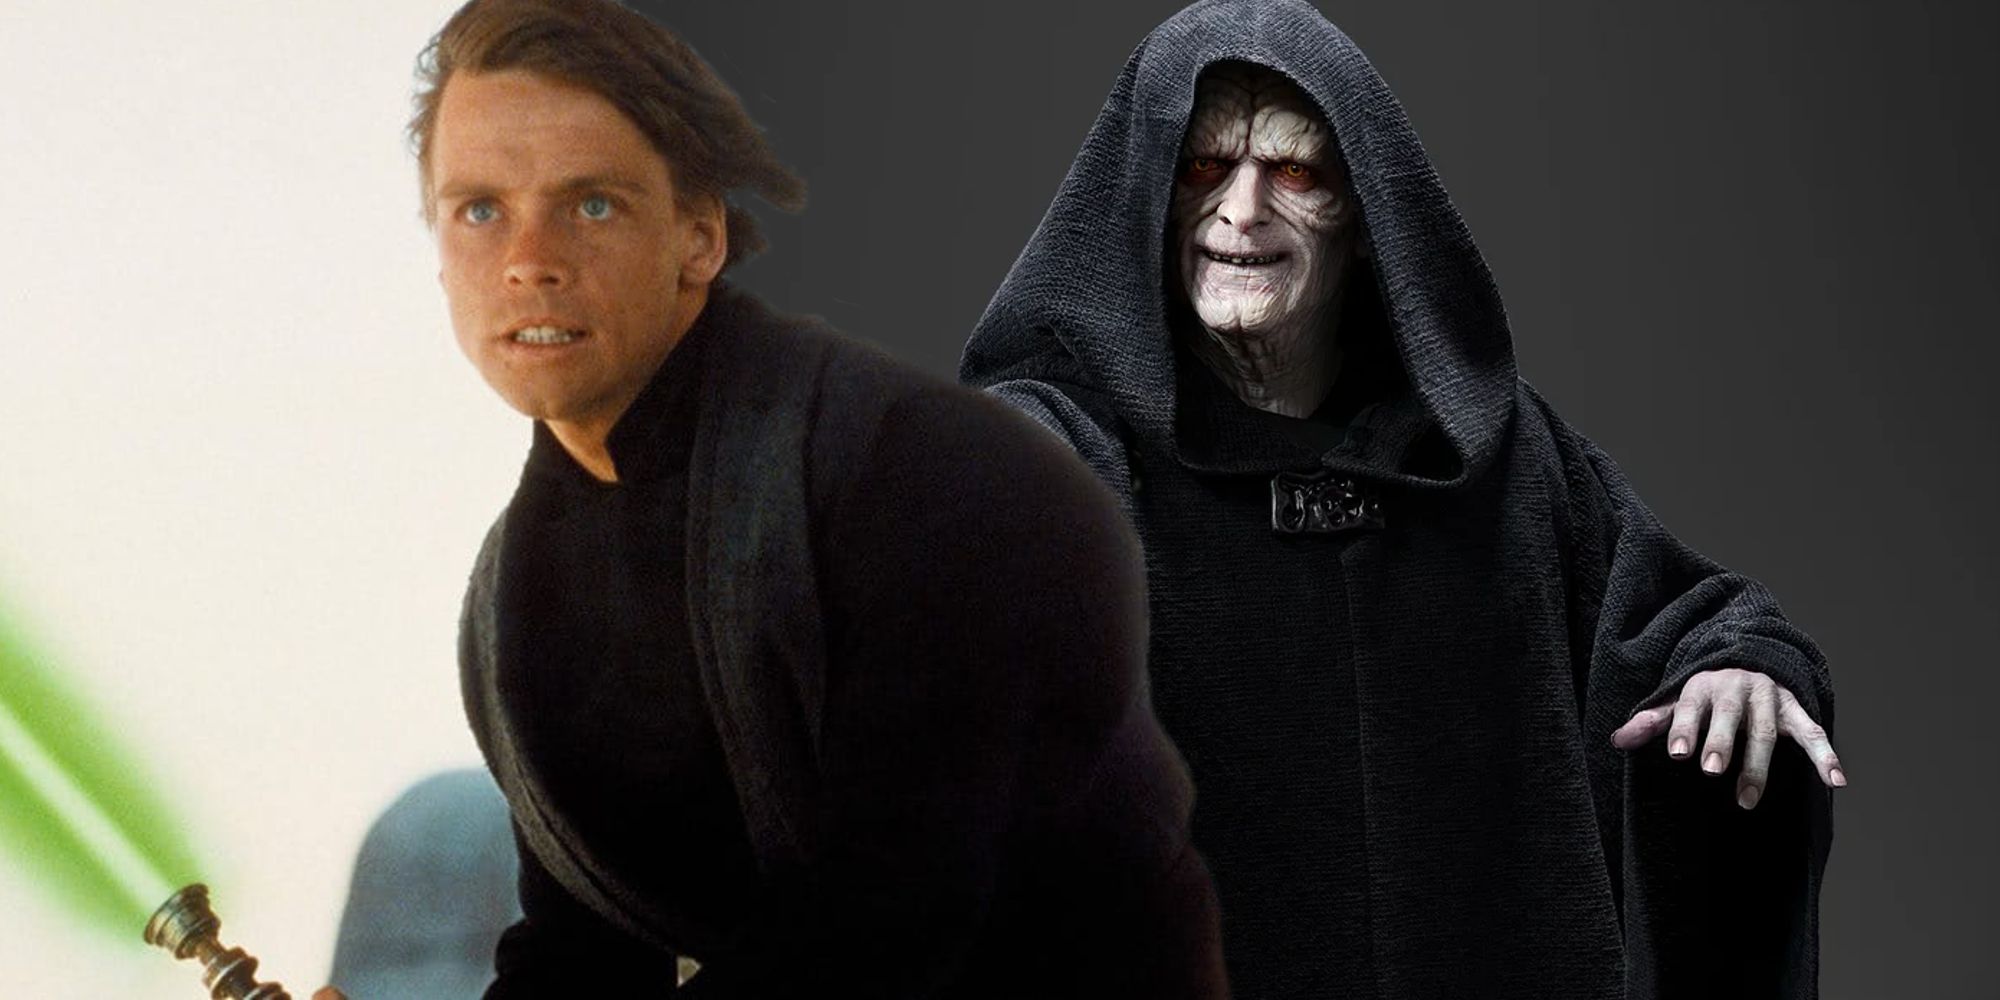 Palpatine’s Contingency Was All About Darth Vader (Not The Rebellion)